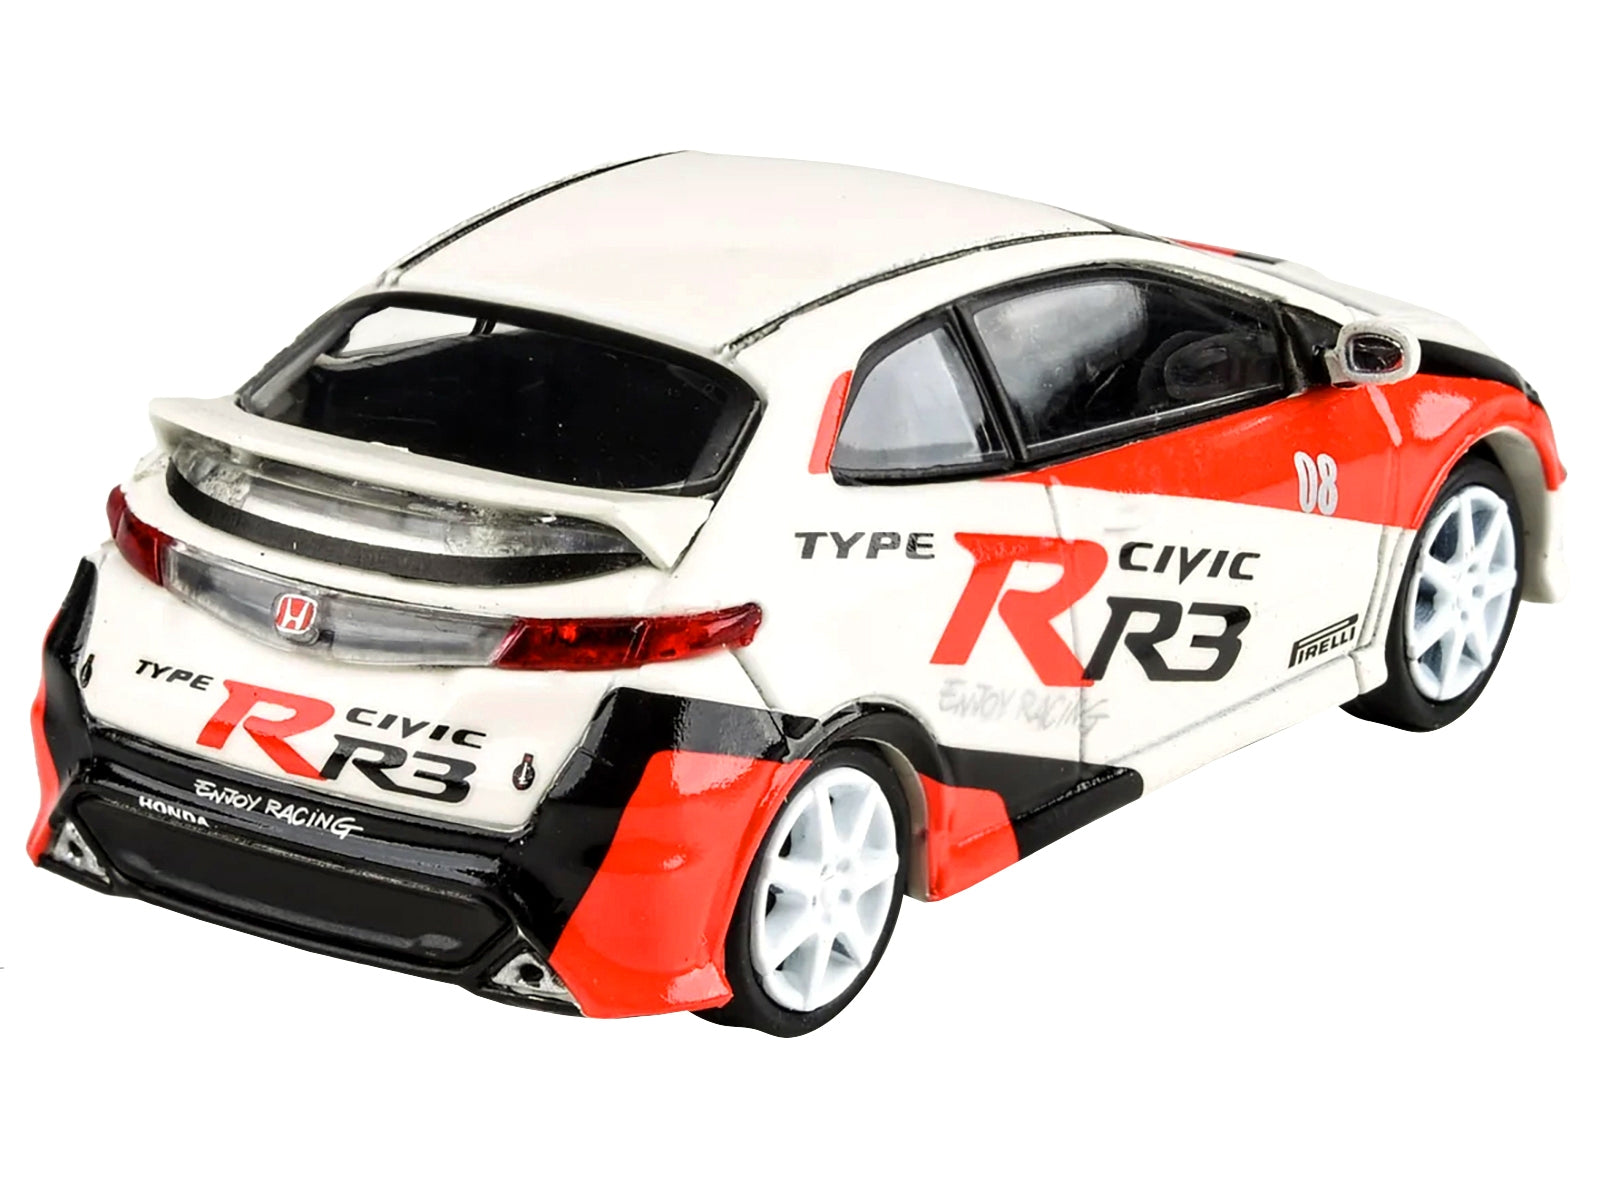 2007 Honda Civic Type R FN2 White "Race Livery" 1/64 Diecast Model Car by Paragon Models Paragon